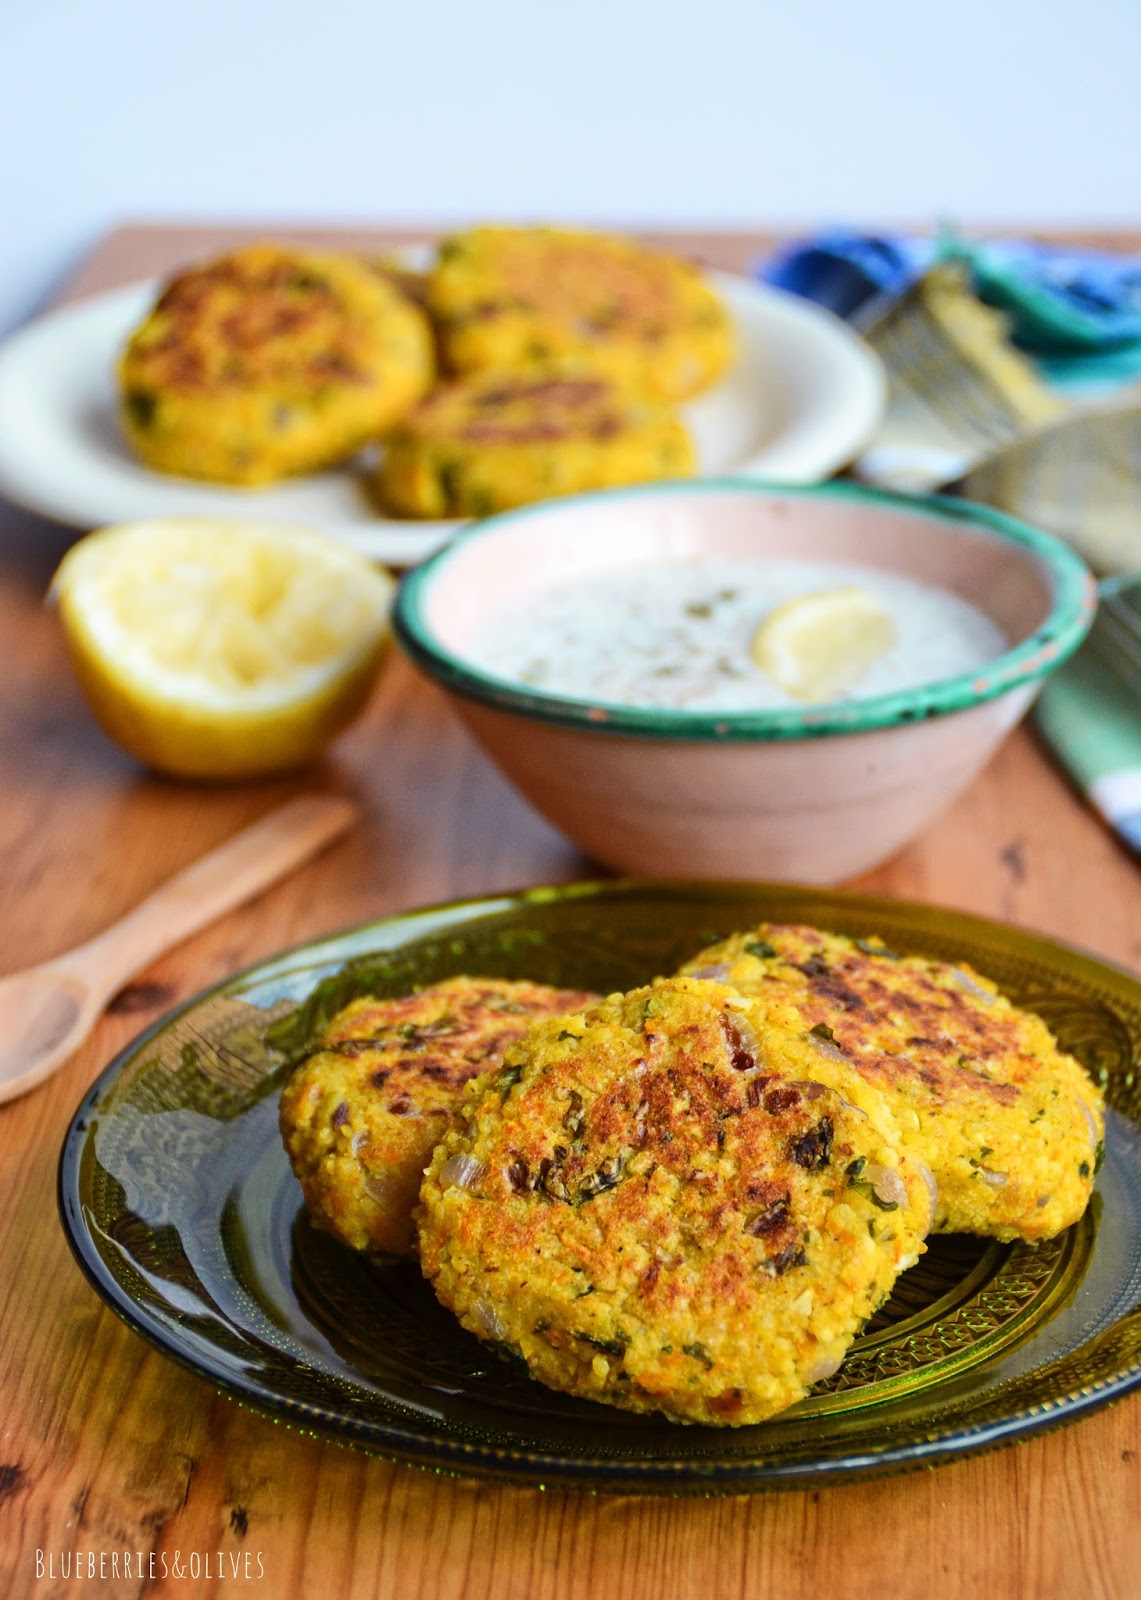 MILLET VEGGIE BURGERS WITH CURRY AND A YOGURT SAUCE (GF, LF, VGT)